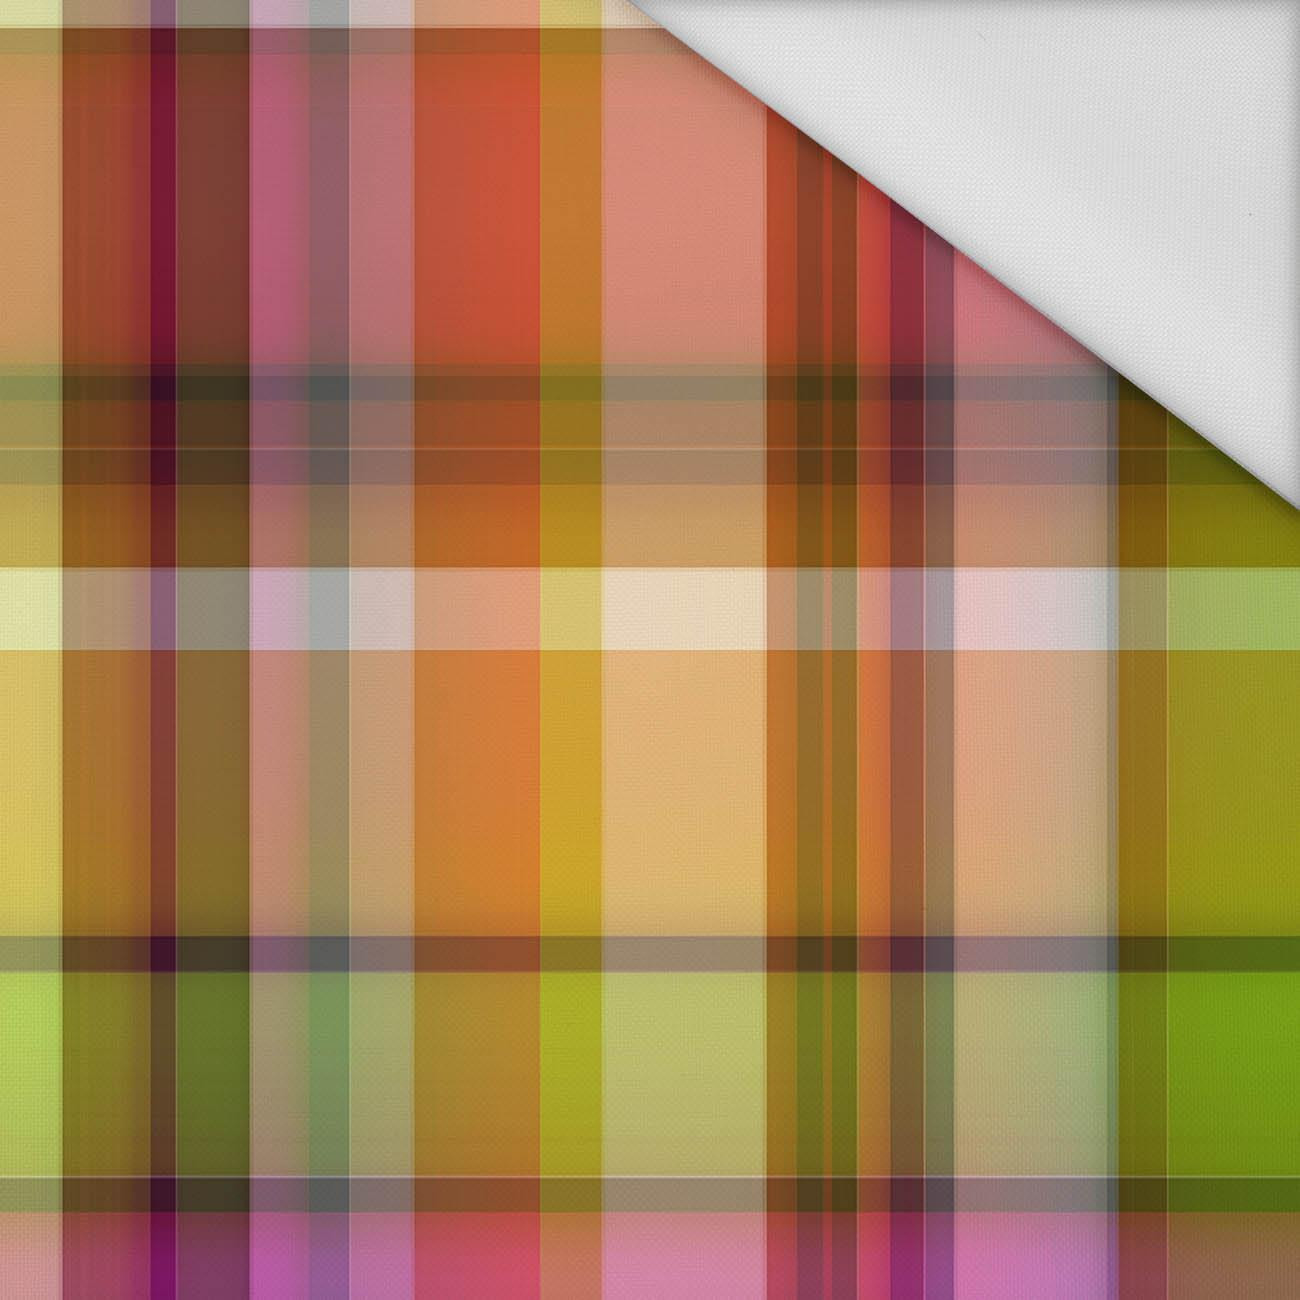 COLORFUL CHECK PAT. 1 - Waterproof woven fabric